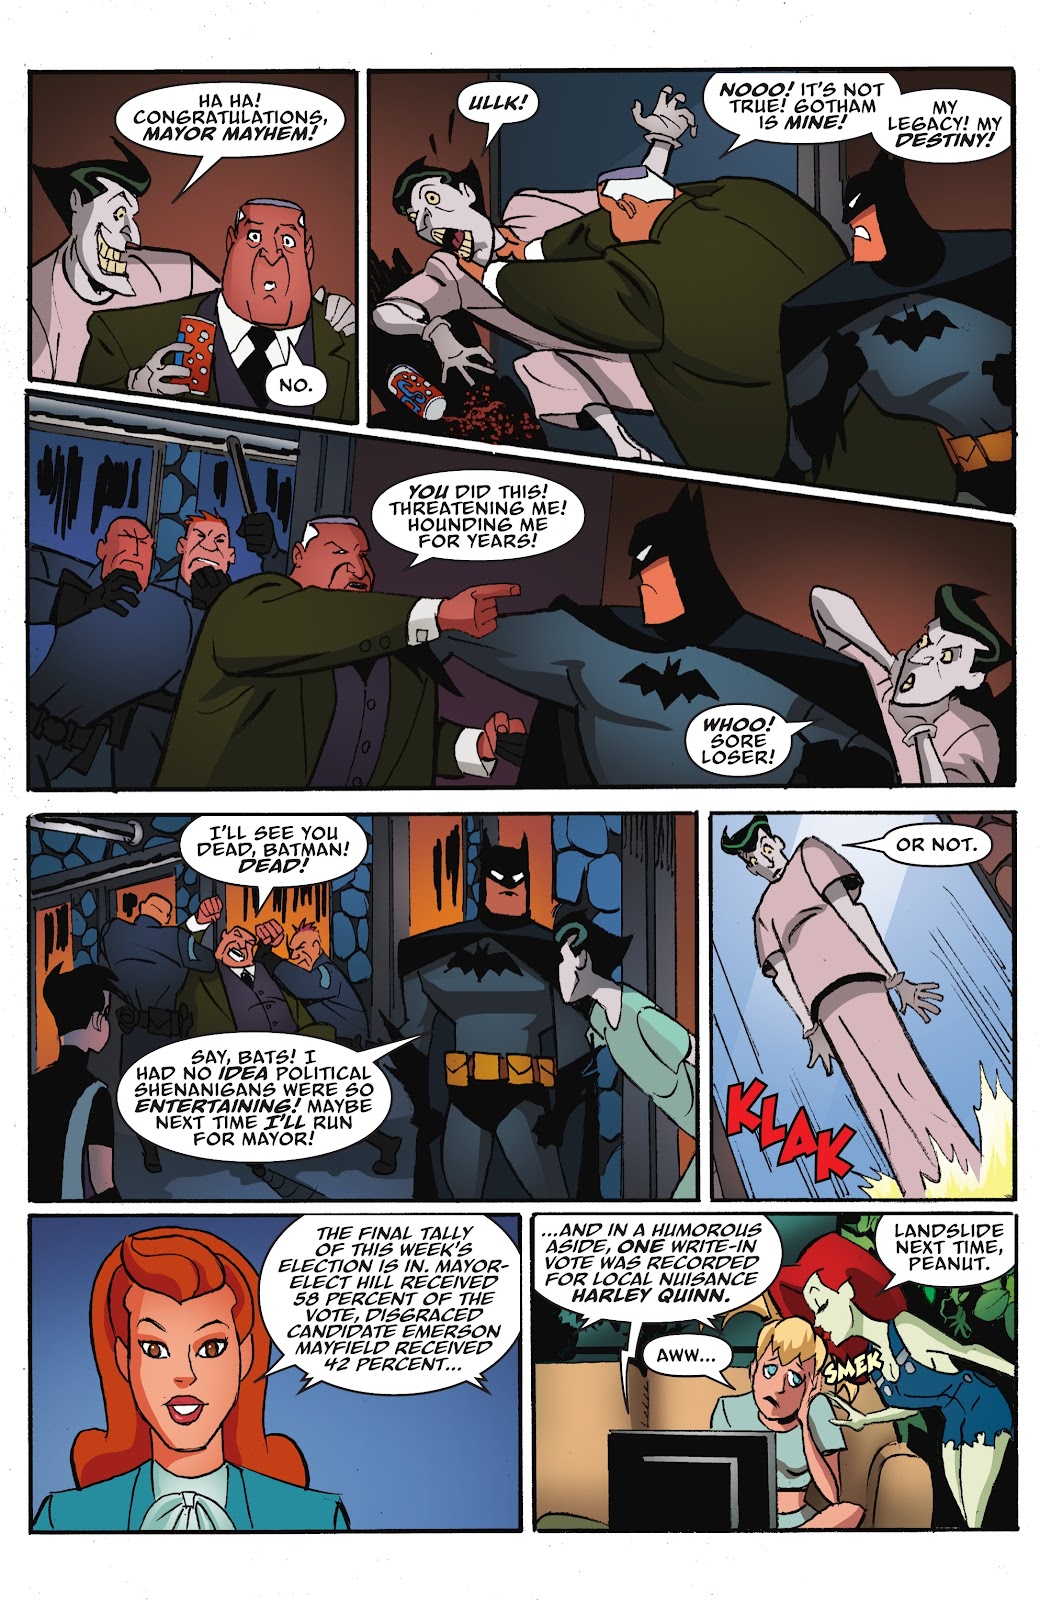 Batman: The Adventures Continue: Season Two issue 7 - Page 21